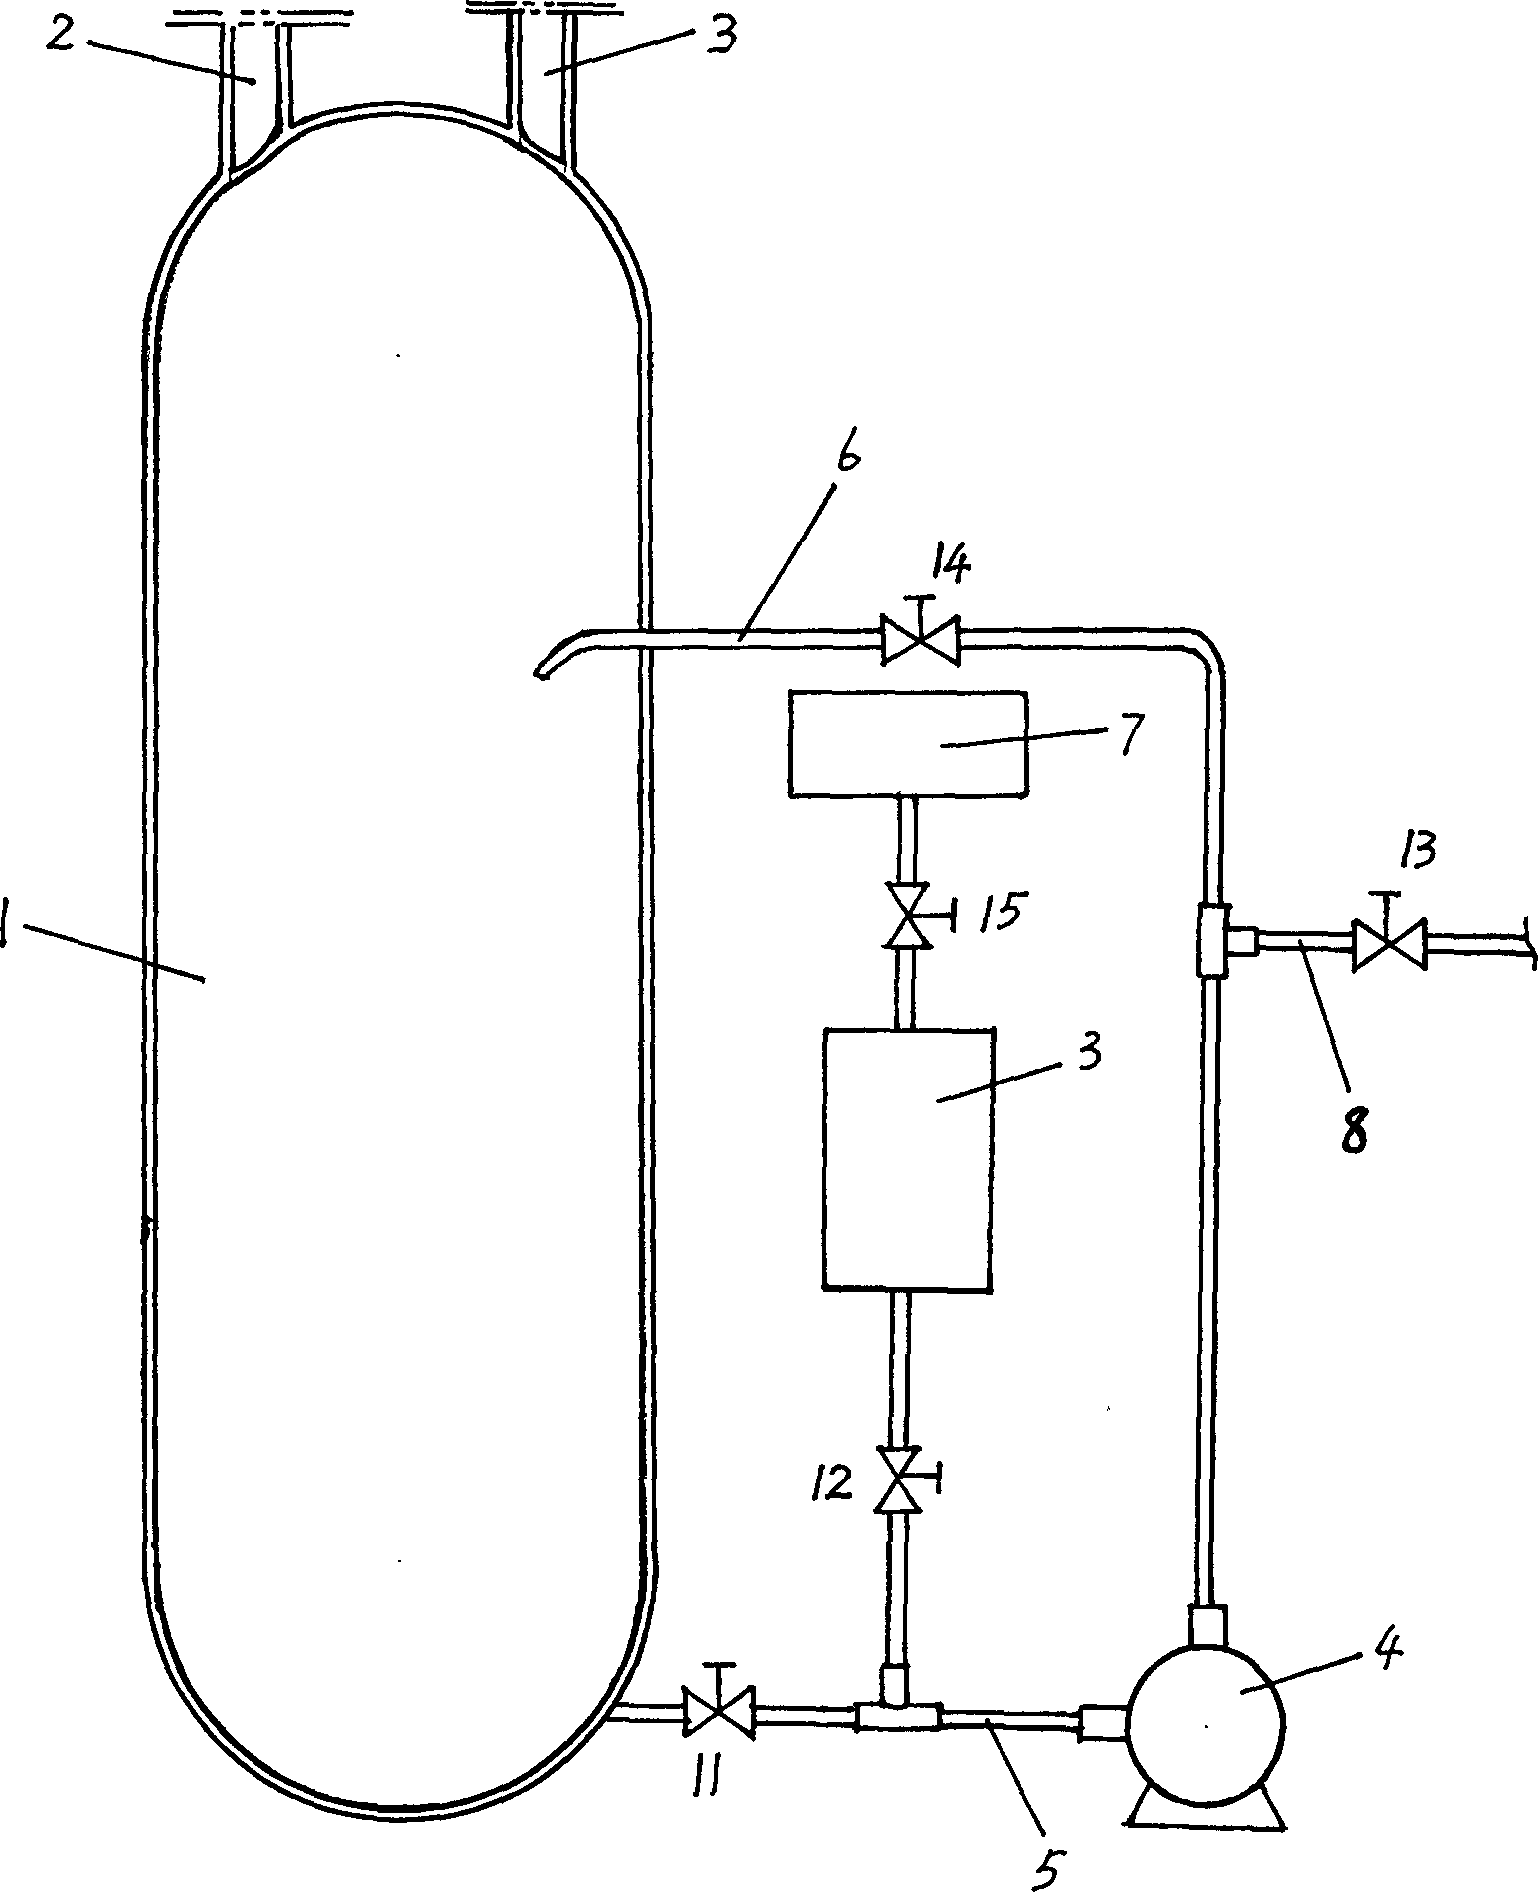 Preparation method of 1,1-difluoro ethane and its production equipment